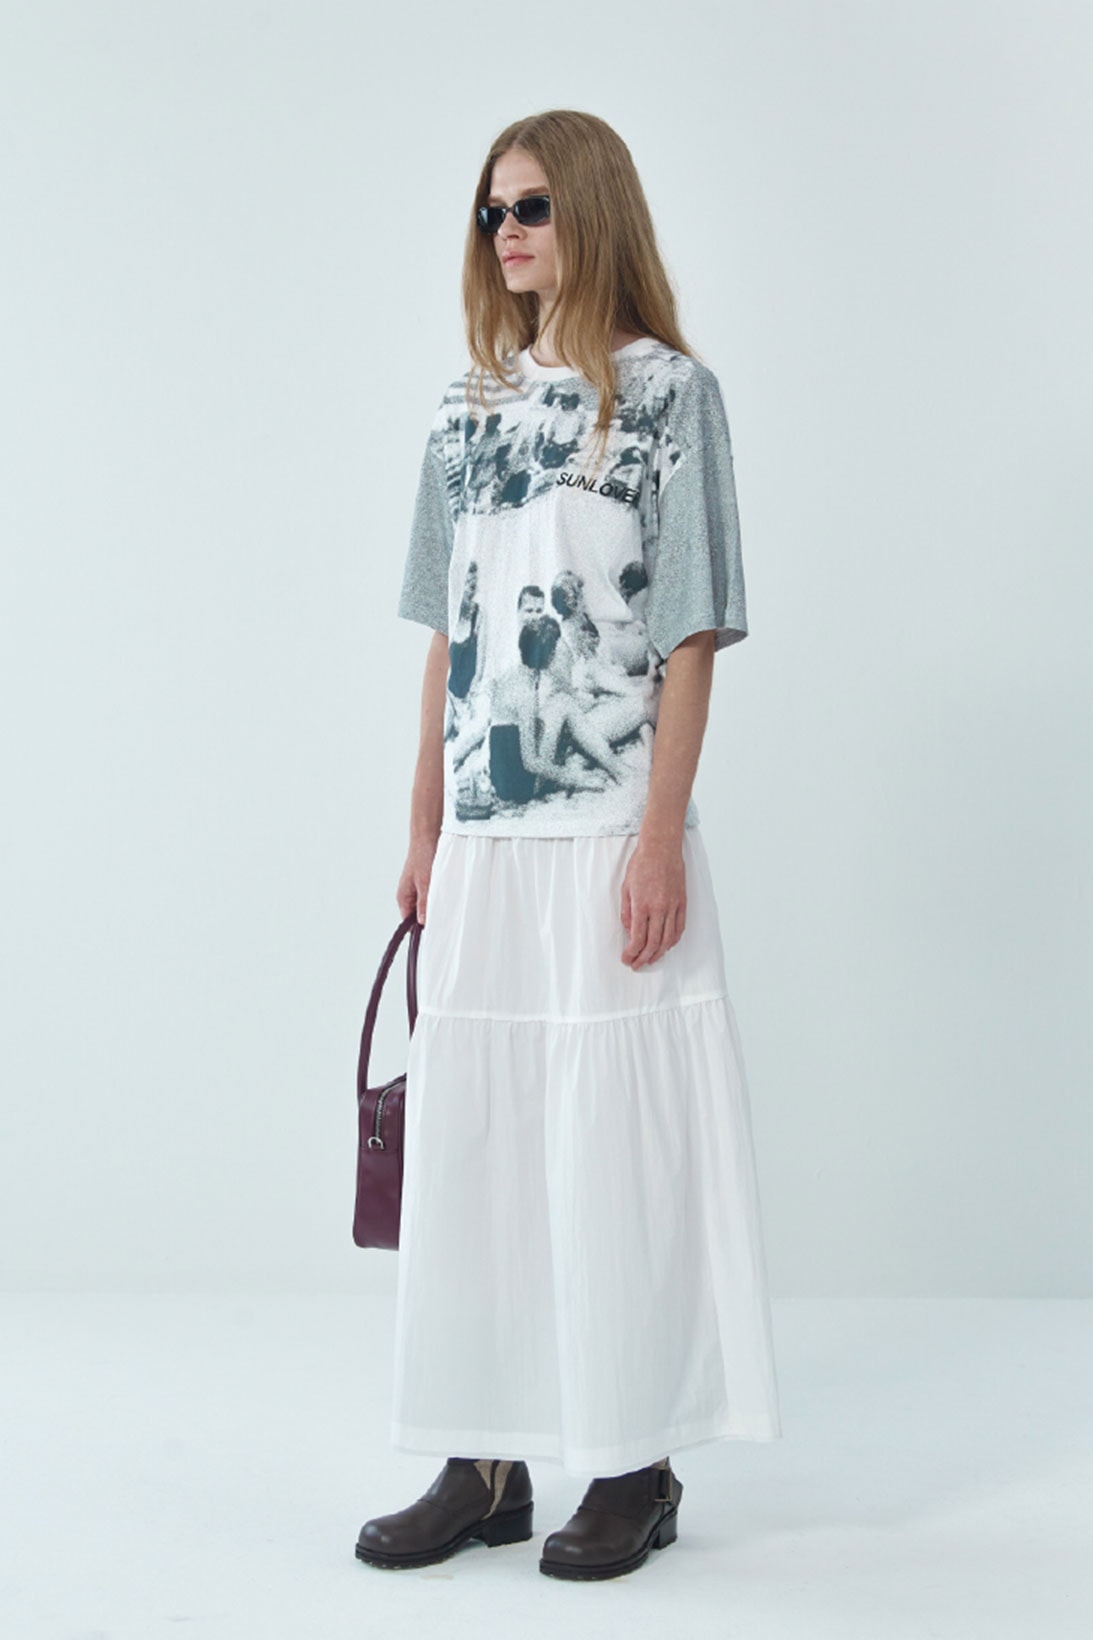 theopen product spring summer 2021 ss21 collection lookbook skirt long tshirt